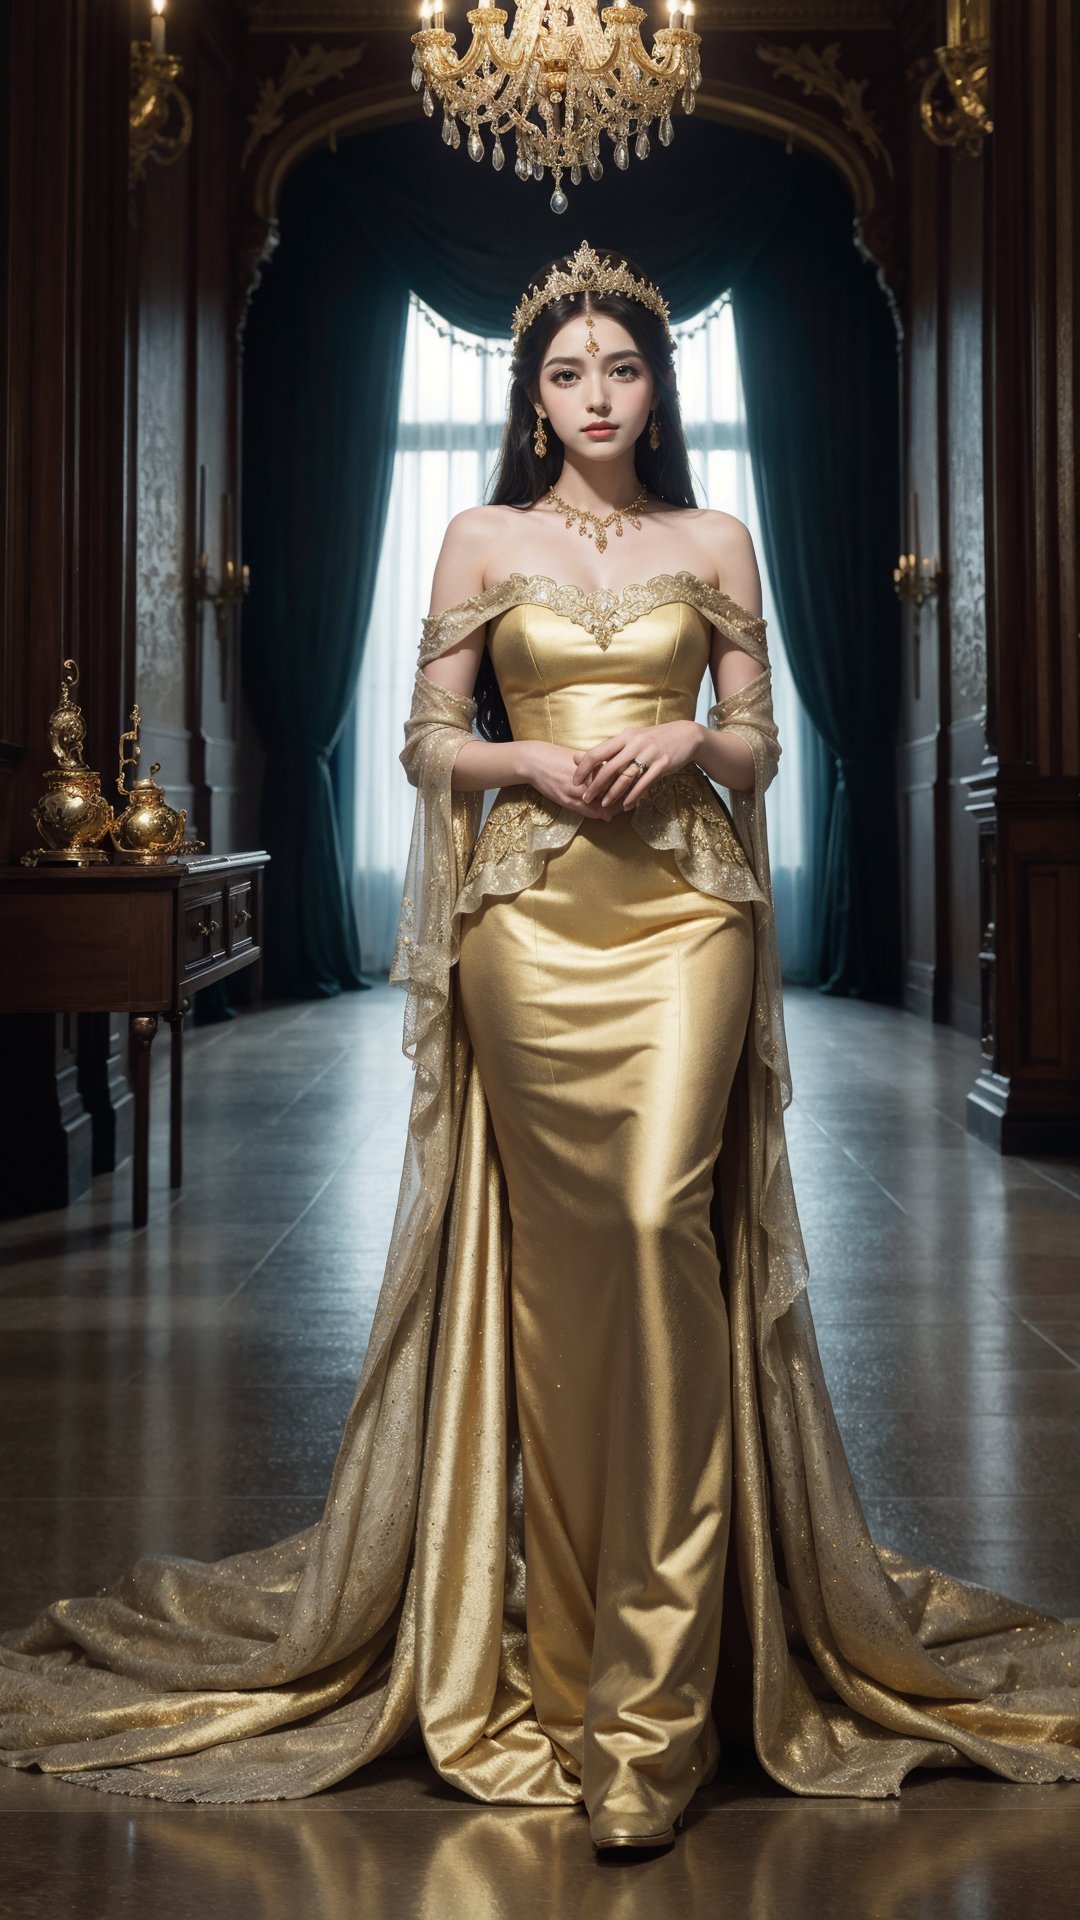 full body, Enchanting Fairy Tale Princess, Royal Castle Setting, Soft Golden Lighting, Regal Gown, (high resolution:1.2), (royal details:1.15), (fairy tale princess:1.1), (majestic ambiance:1.2), (golden glow:1.1), (intricate details:1.14), (elegance:1.1), standing<lora:TQSizeSlider:0>, (masterpiece,best quality:1.5)